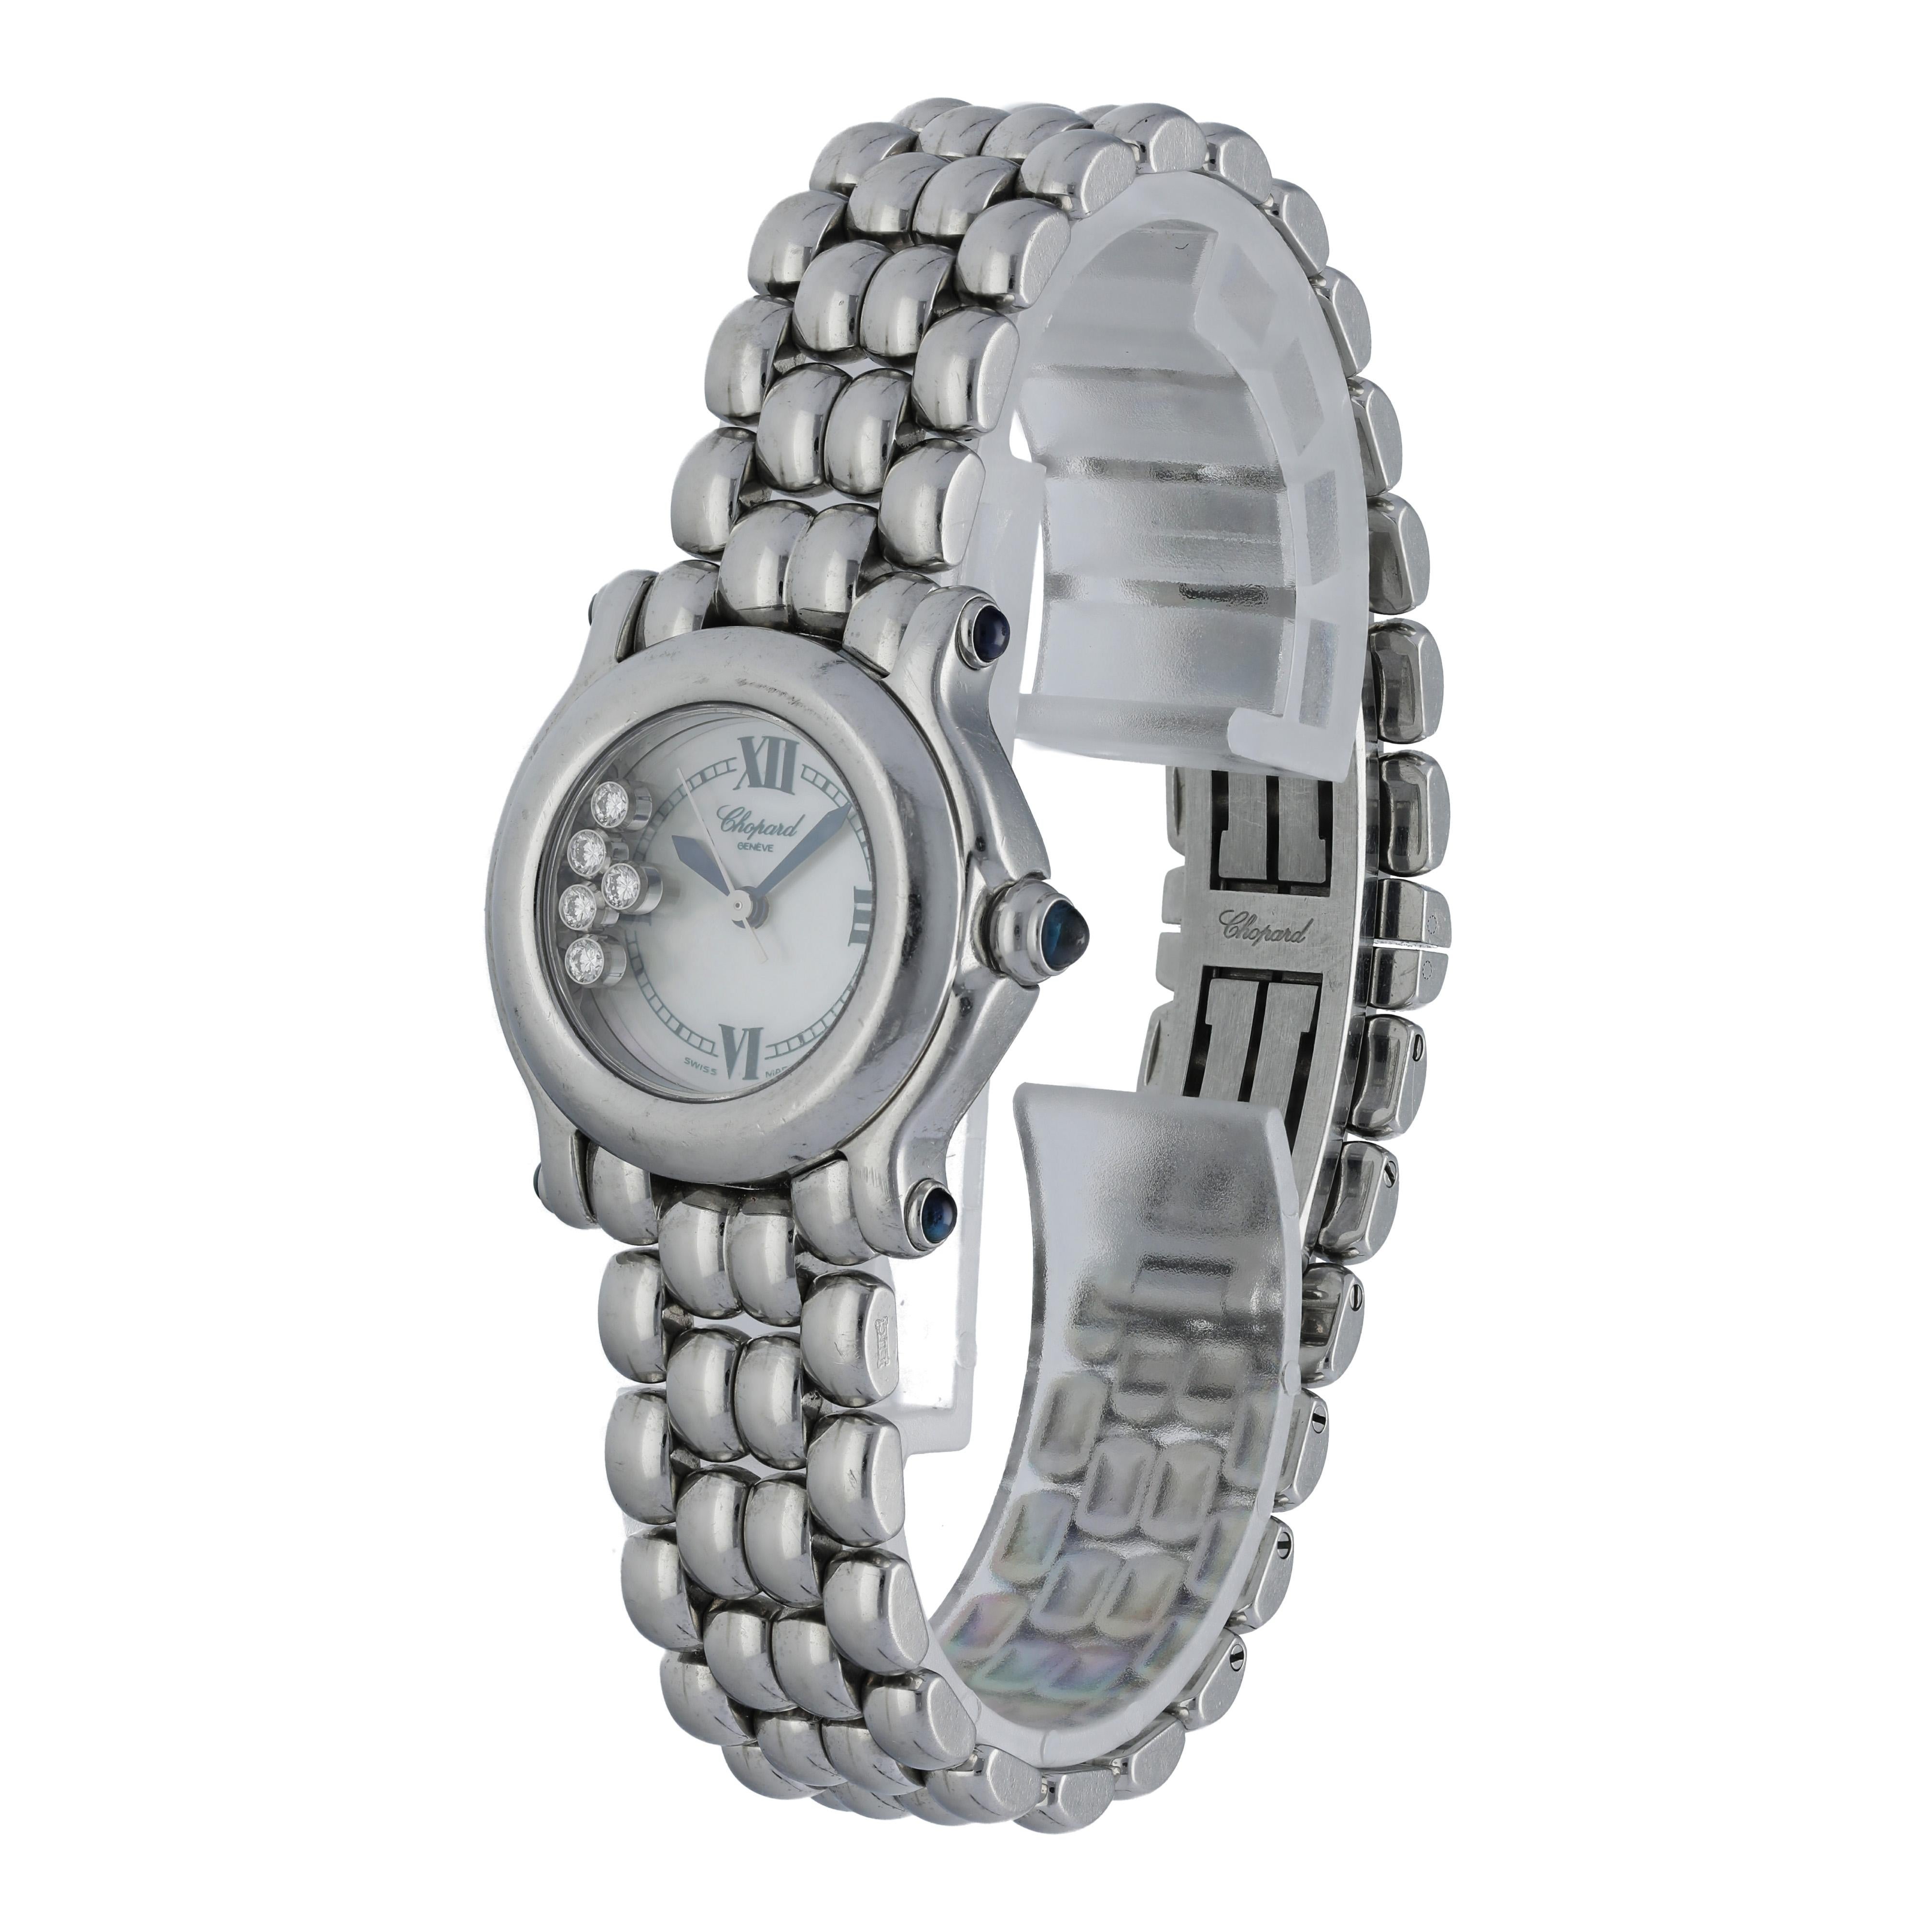 Chopard Happy Sport 27/8250-23 Ladies Watch. 
26mm Stainless Steel case. 
Mother-of-Pearl dial with blue steel hands, roman numeral hour markers, and 5 floating diamonds. 
Minute markers on the outer dial. 
Stainless Steel Bracelet with Hidden